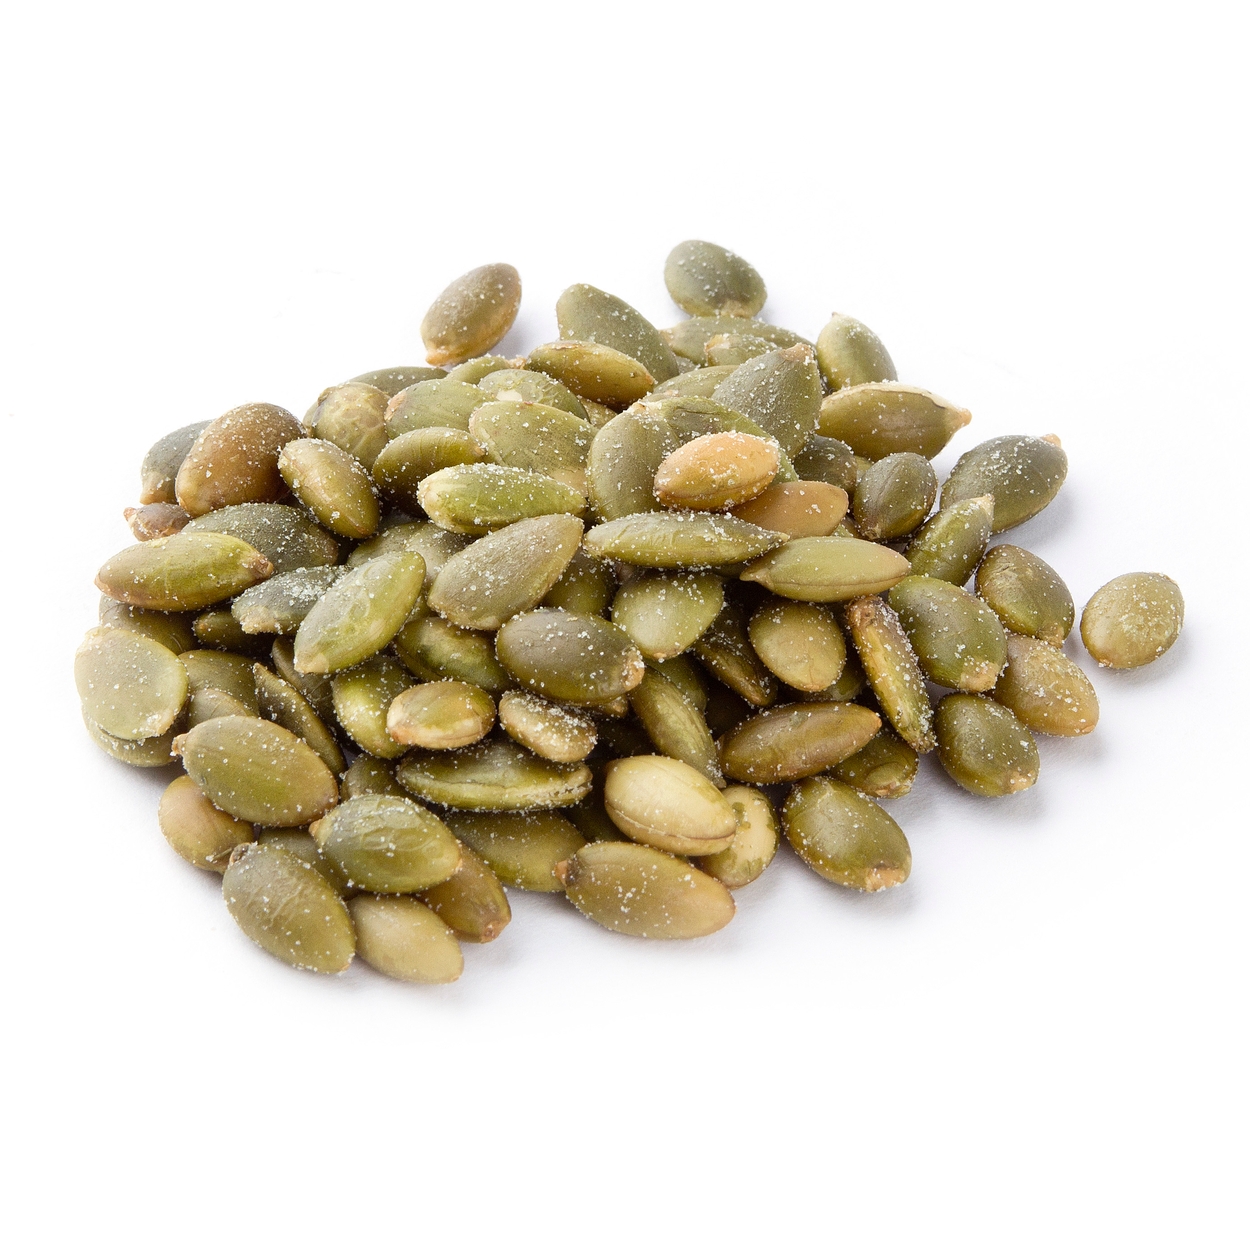 are cooked pumpkin seeds bad for dogs